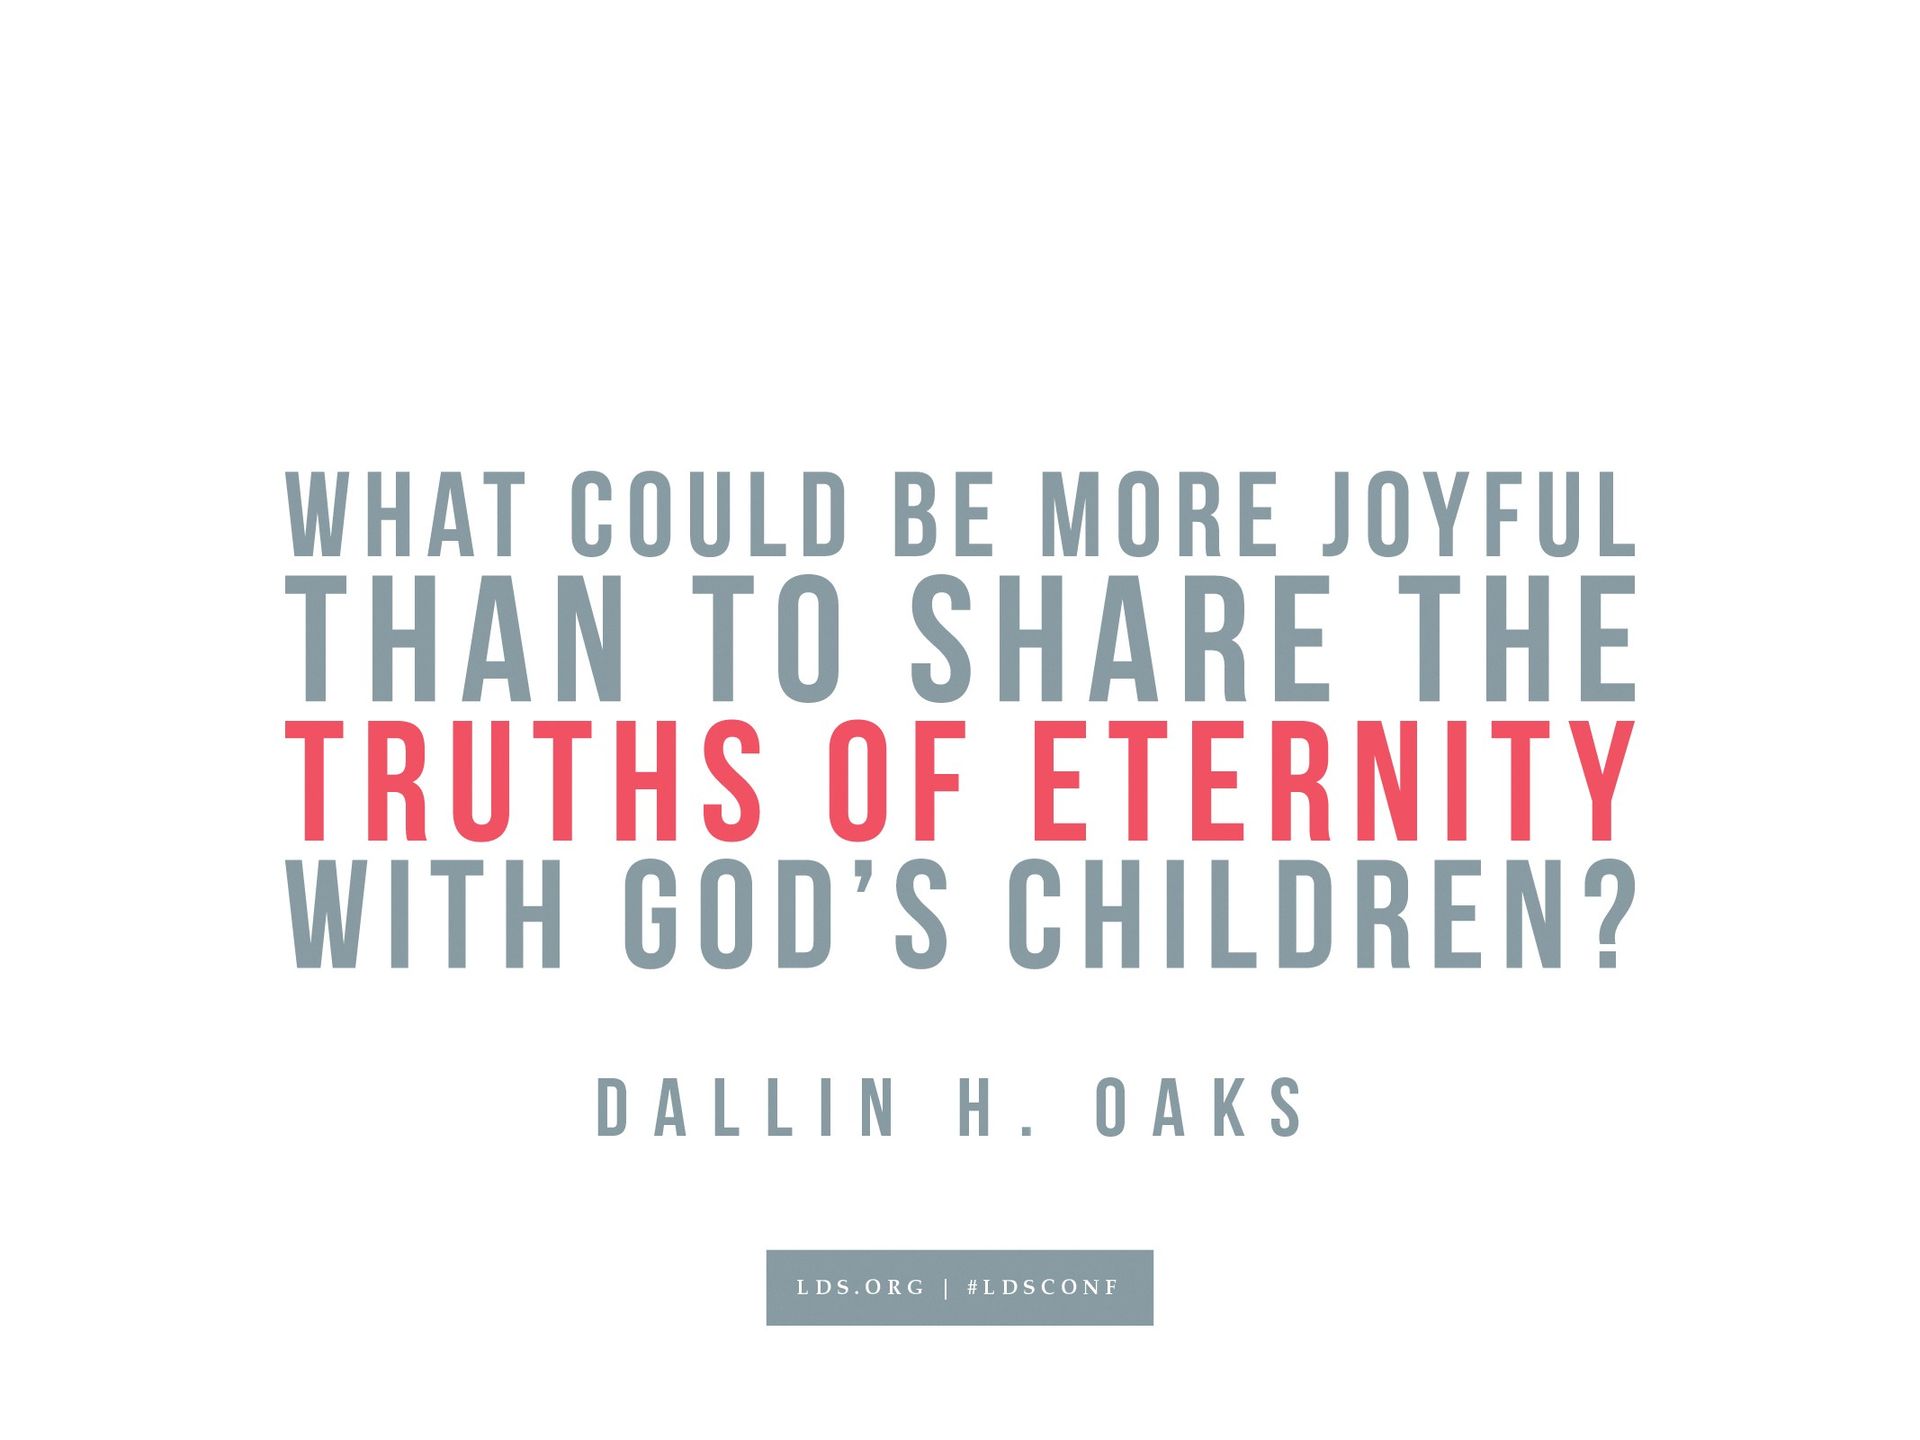 “What could be more joyful than sharing the truths of eternity with God’s children?”—Dallin H. Oaks, “Sharing the Restored Gospel”